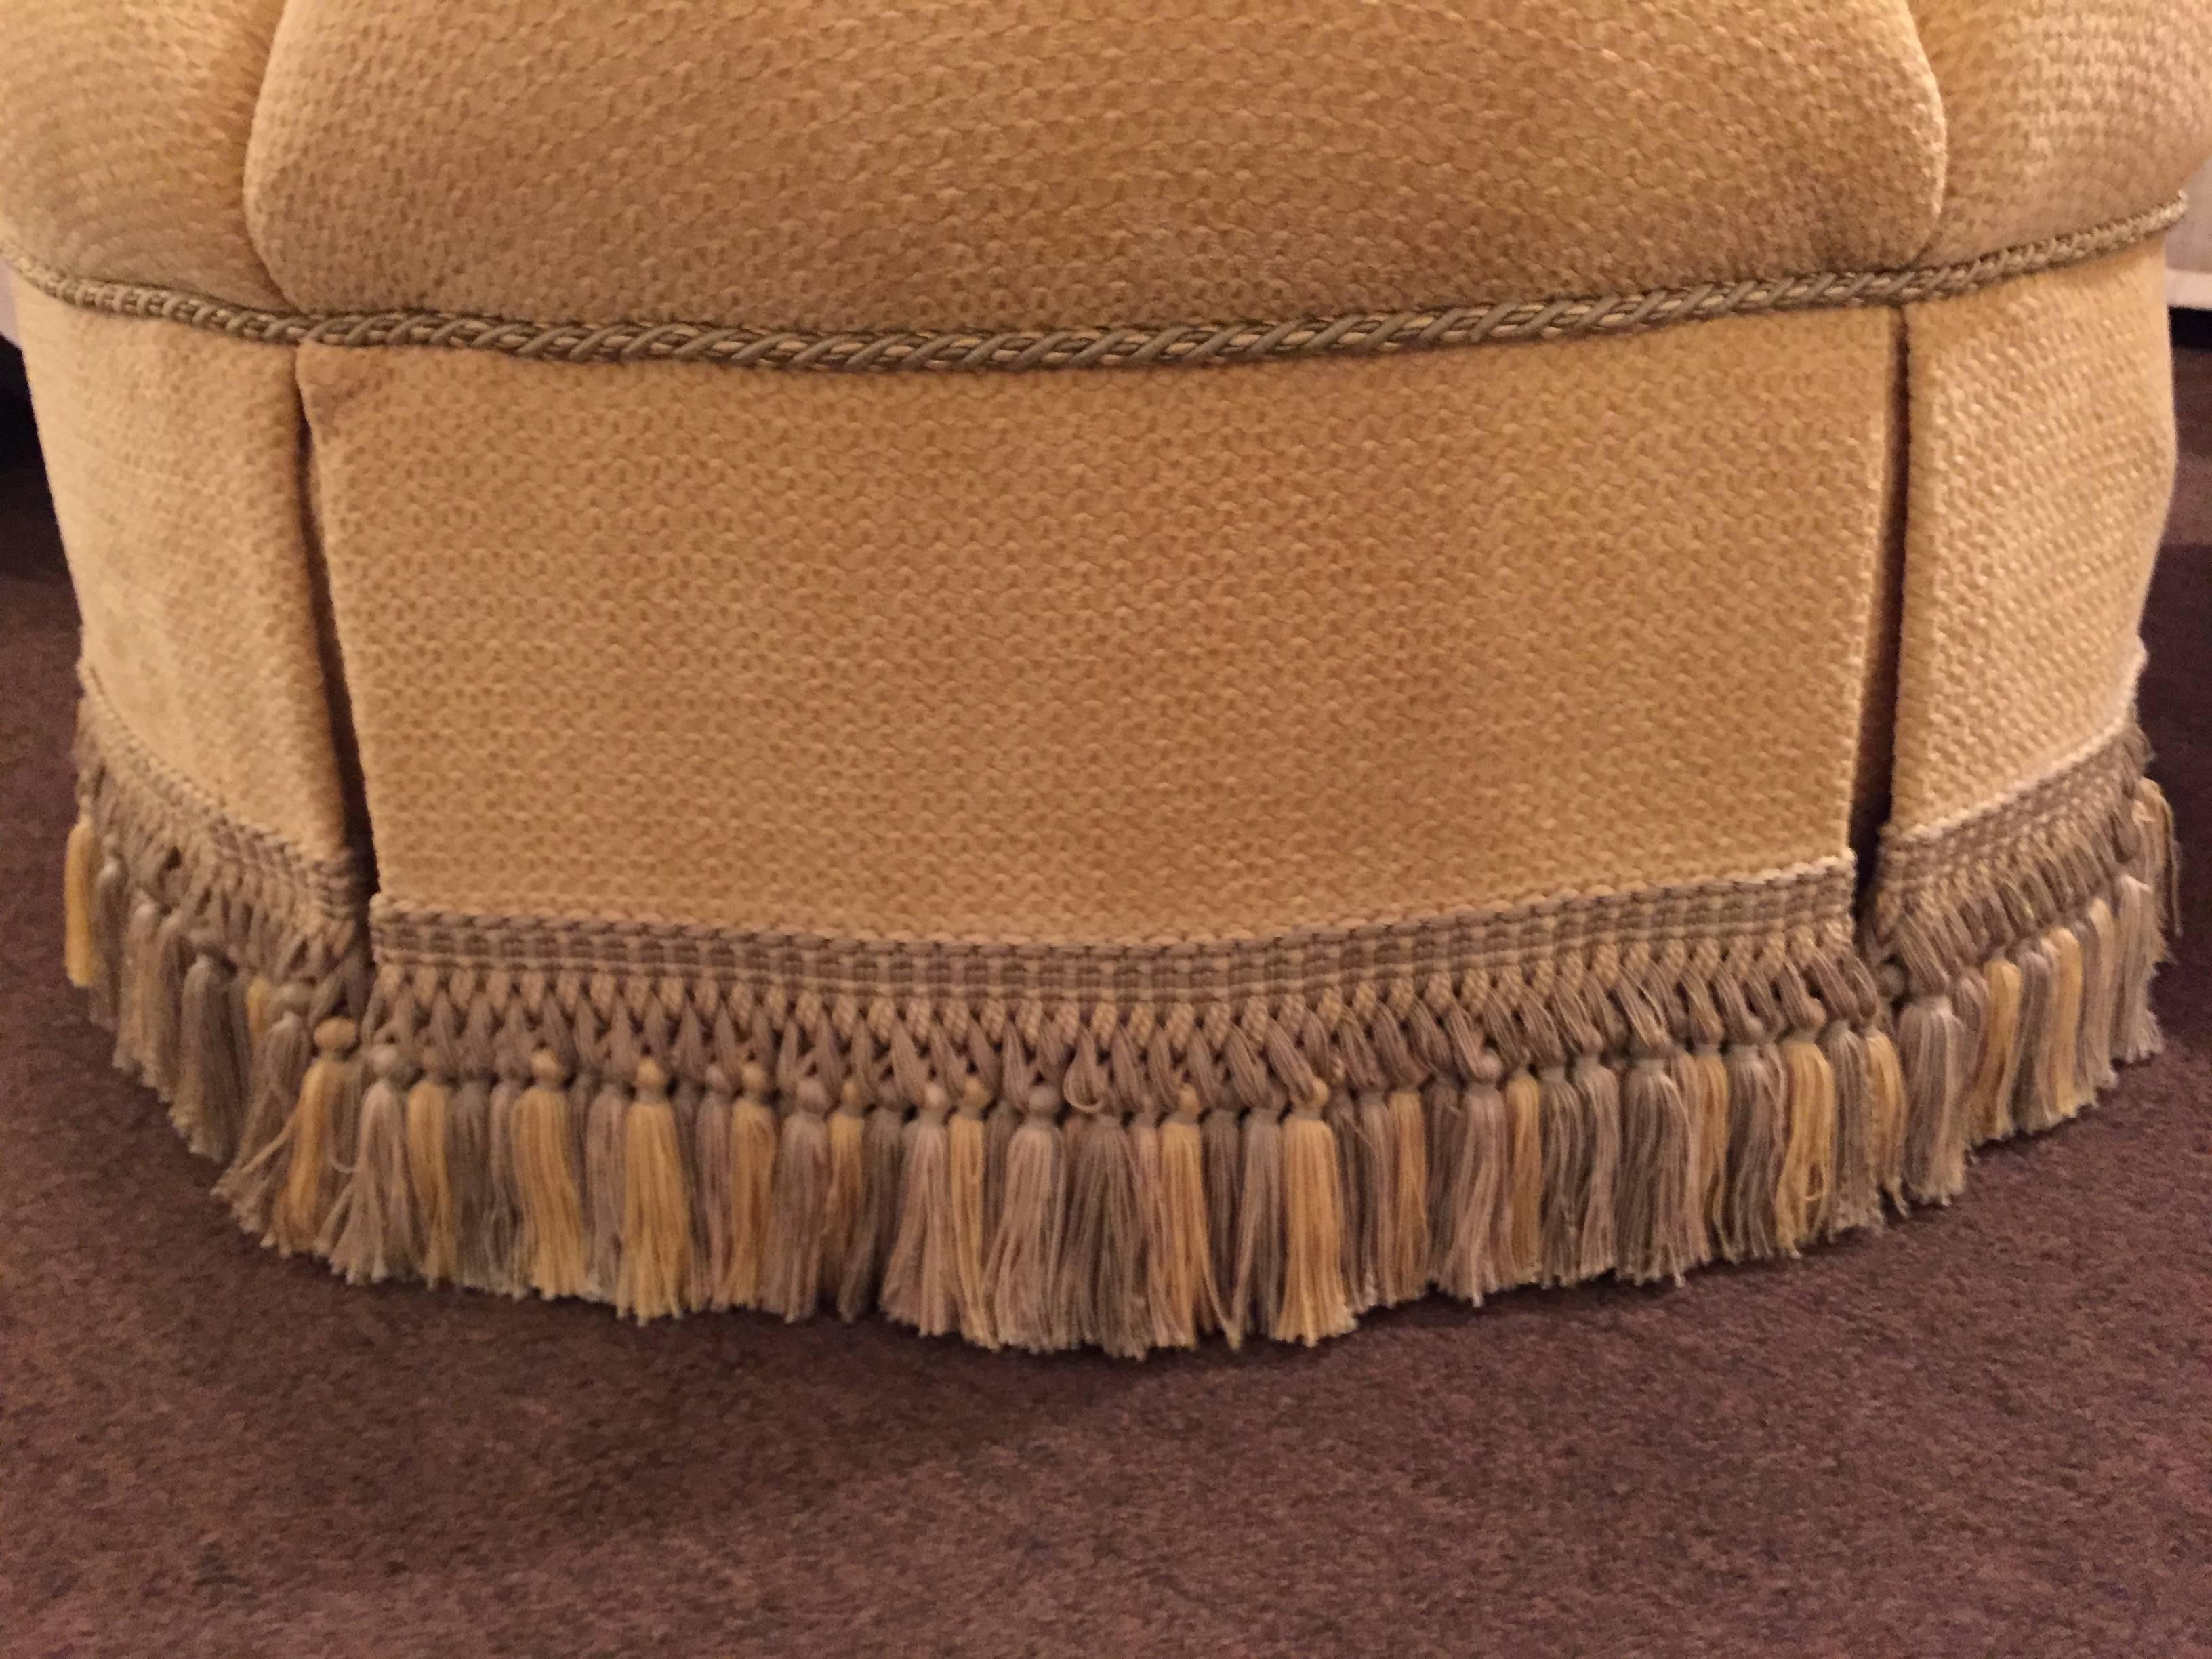 Art Deco Circular Finely Upholstered and Lined Ottoman or Poof with a Tassel Fringe Base